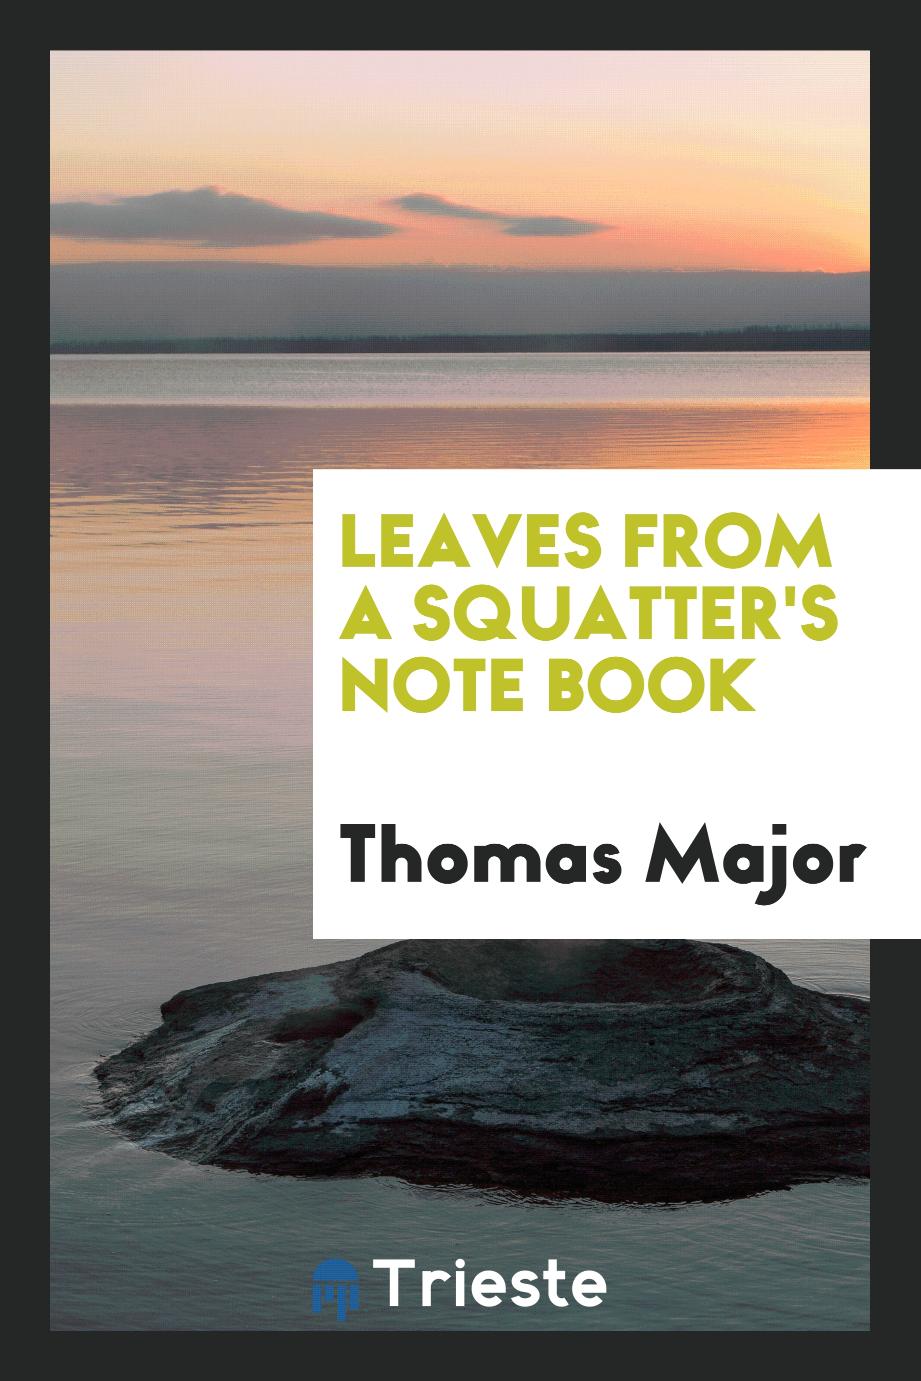 Leaves from a squatter's note book